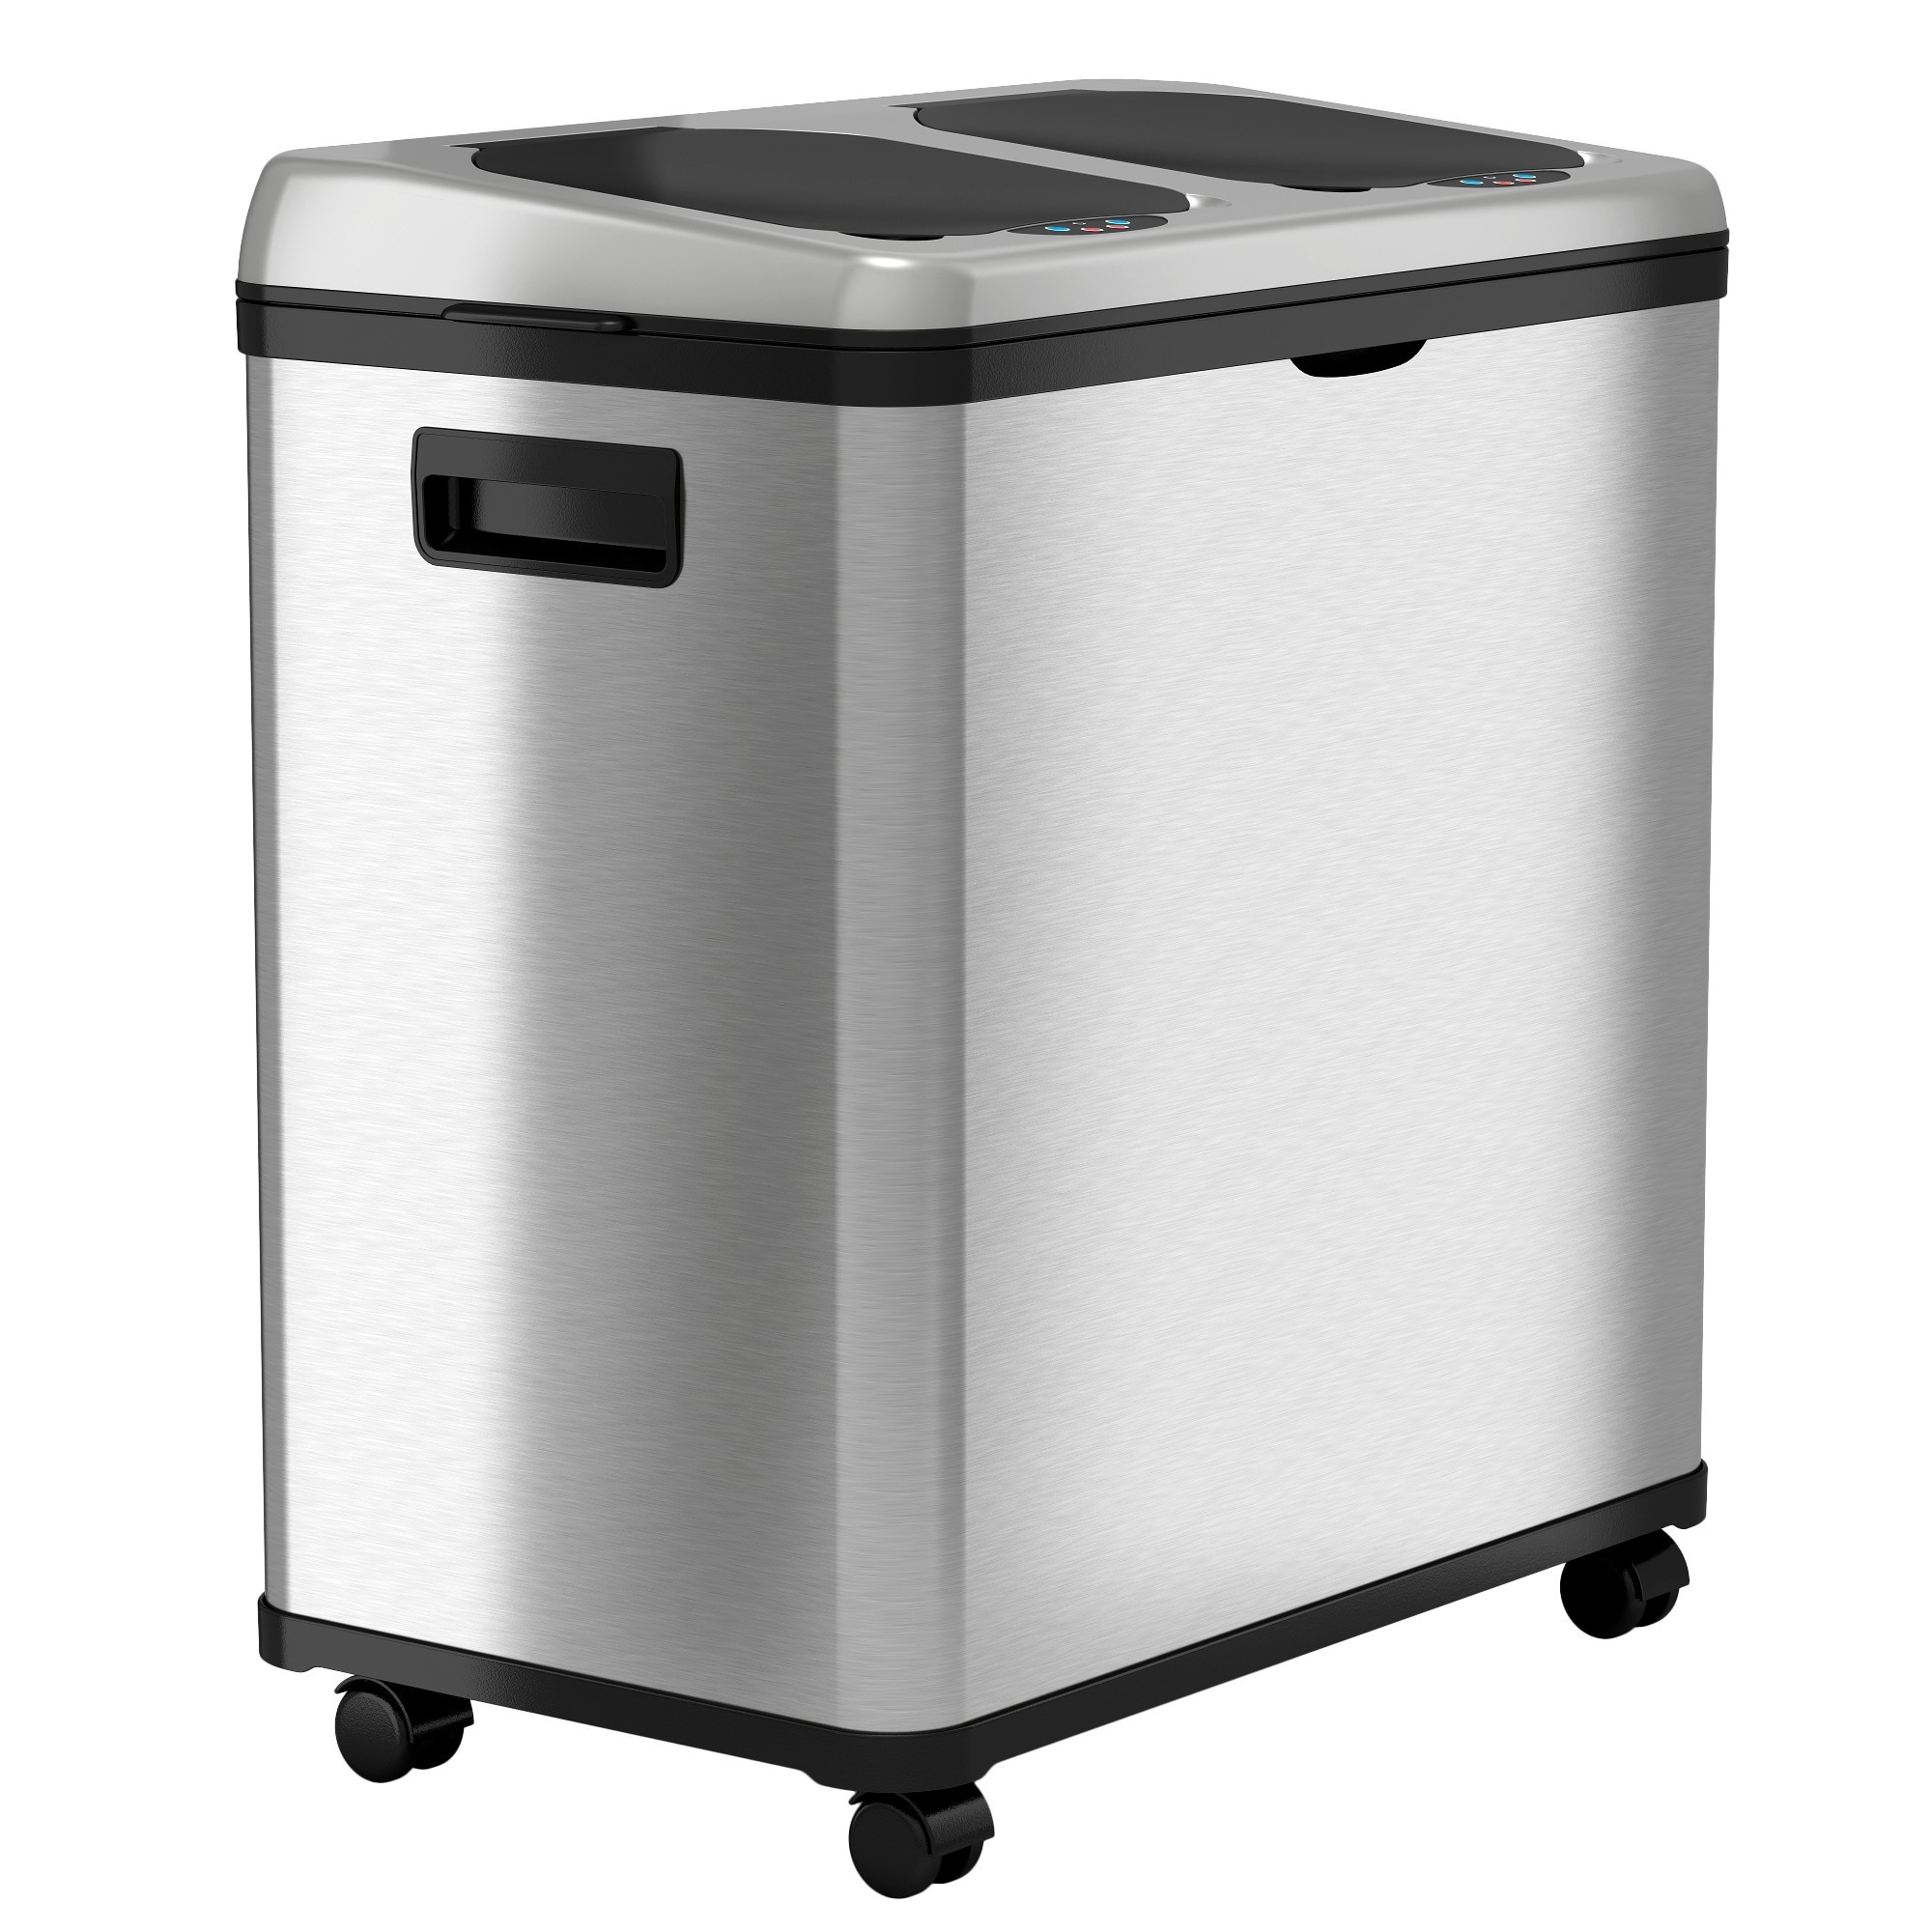  iTouchless SoftStep 8 Gallon Kitchen Step Trash Can with Odor  Filter & Removable Inner Bucket, Stainless Steel, 30 Liter Semi-Round Pedal Garbage  Bin for Bedroom, Bathroom, Home, Office, Quiet Lid 